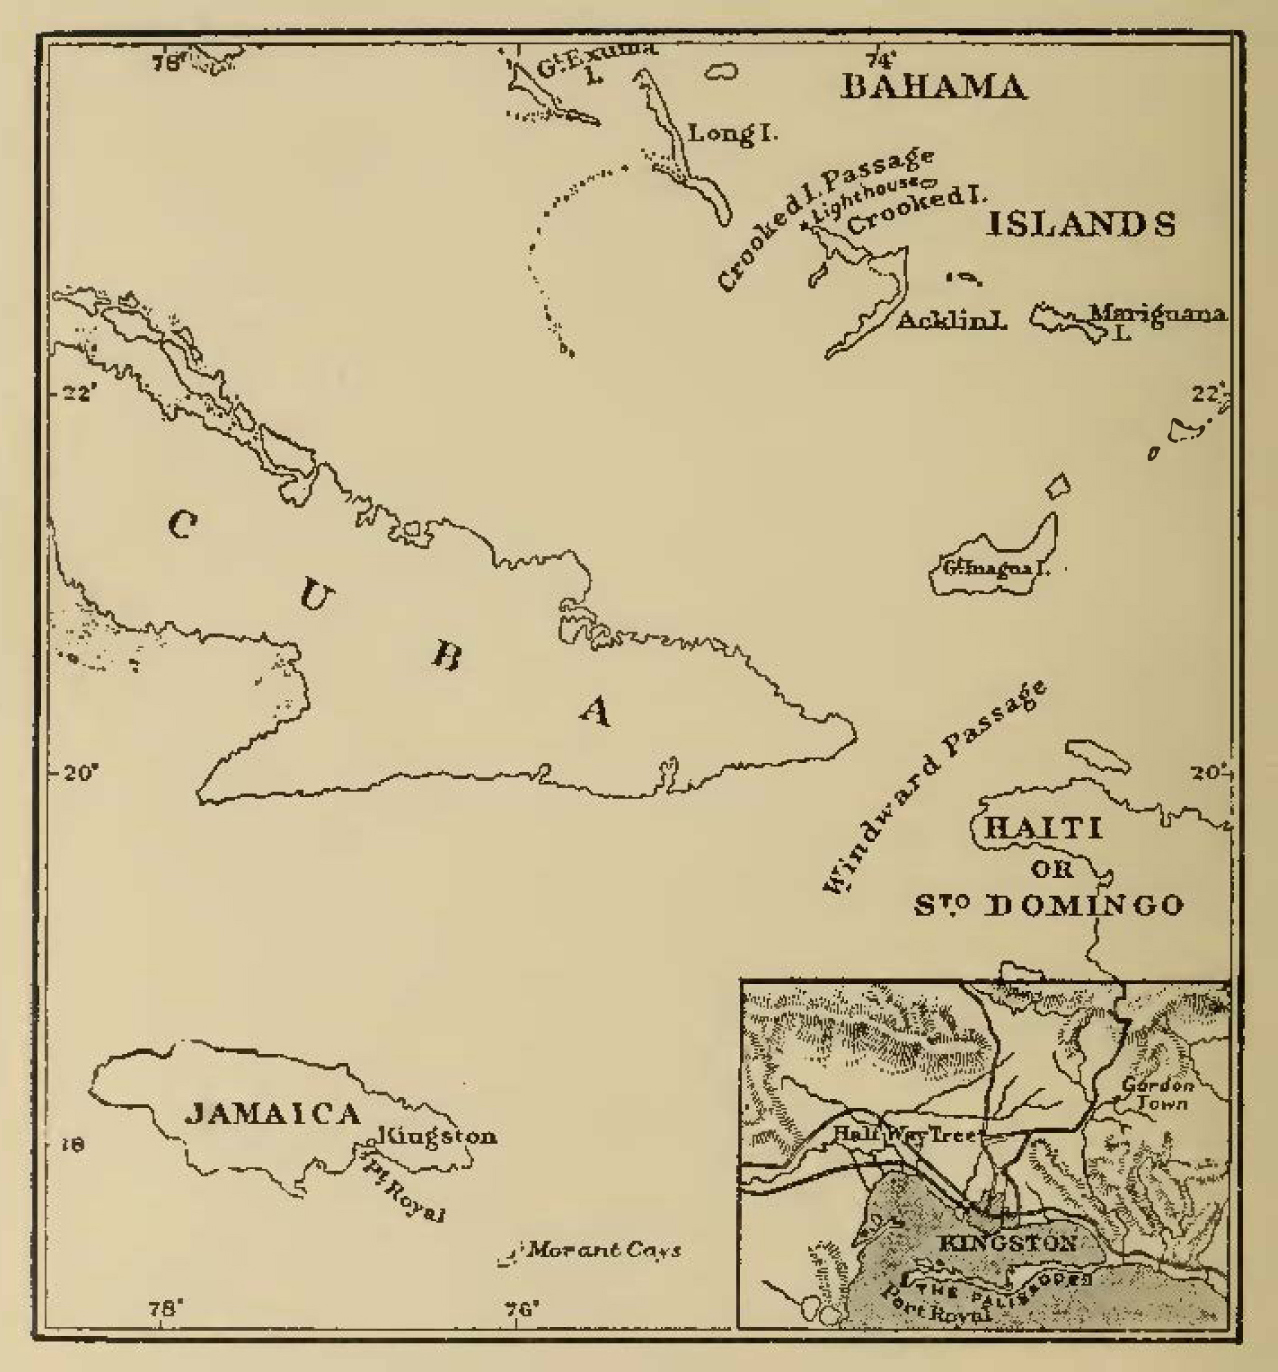 map of Jamaica, Cuba, and Bahamas with Kingston inset